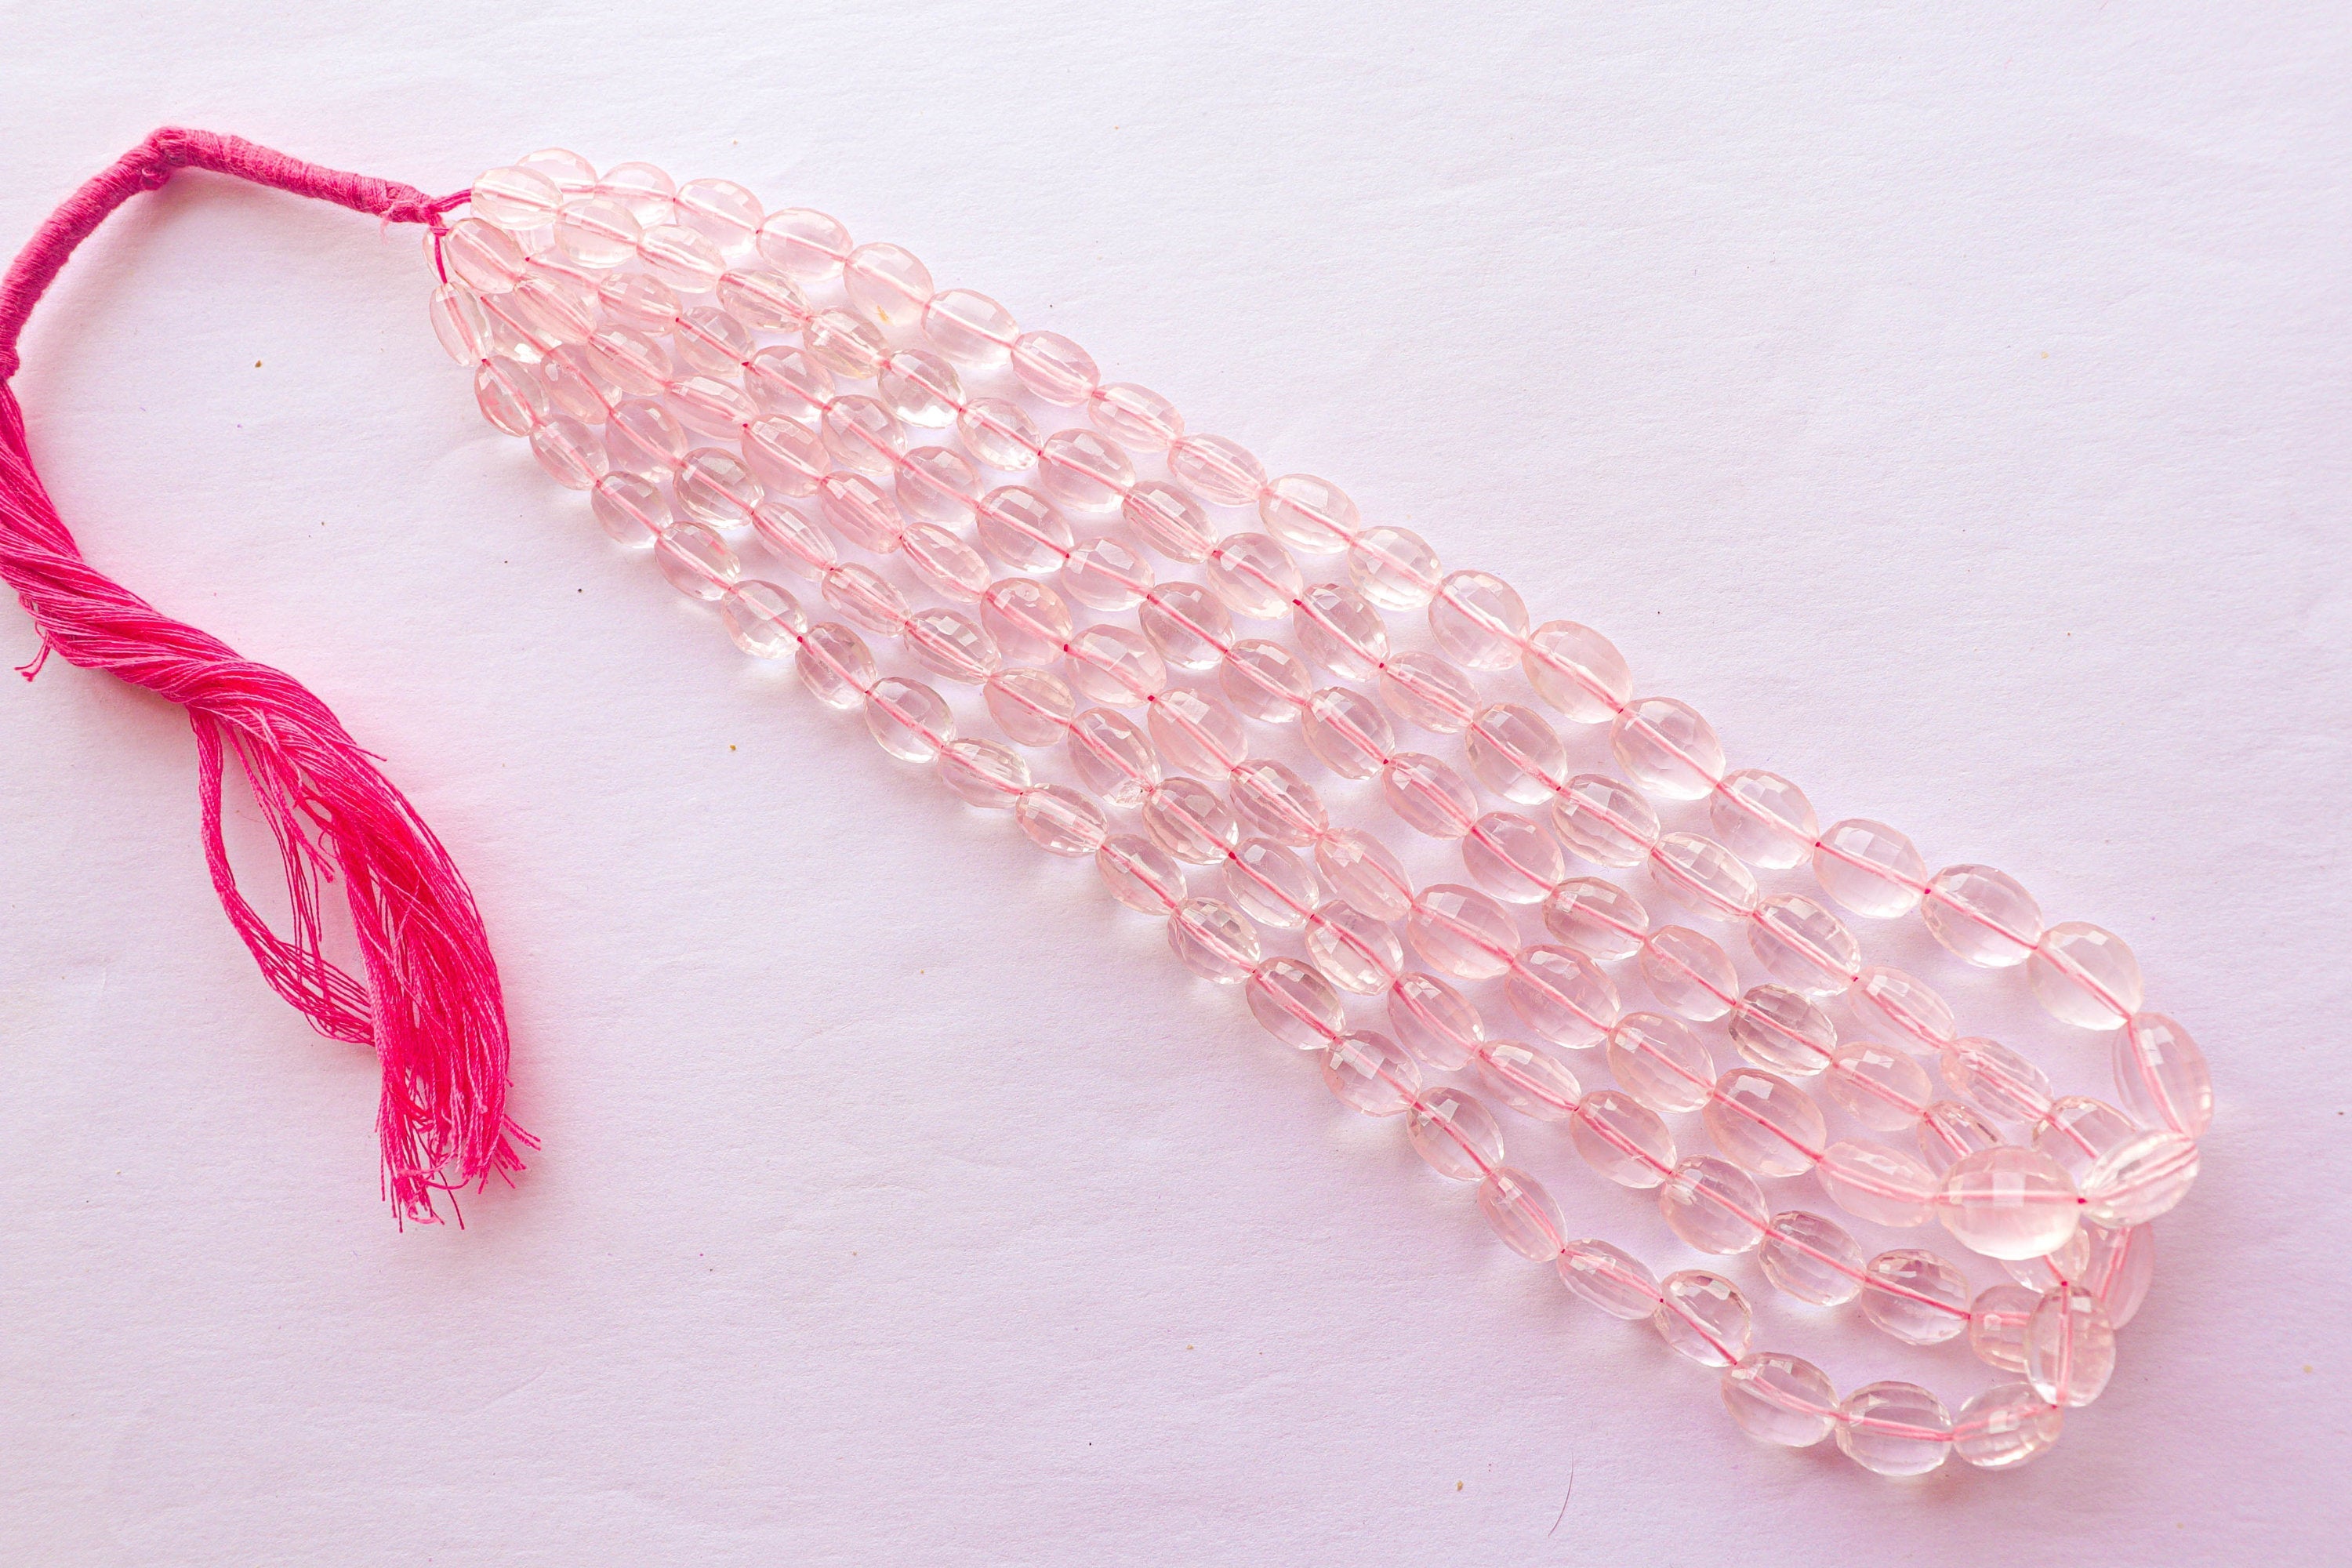 Rose Quartz Step cut Oval Shape Beads | 16 inch String | 6x9mm to 10x13mm | 40 Pieces | Center drill | Natural Gemstone Beads Beadsforyourjewelry